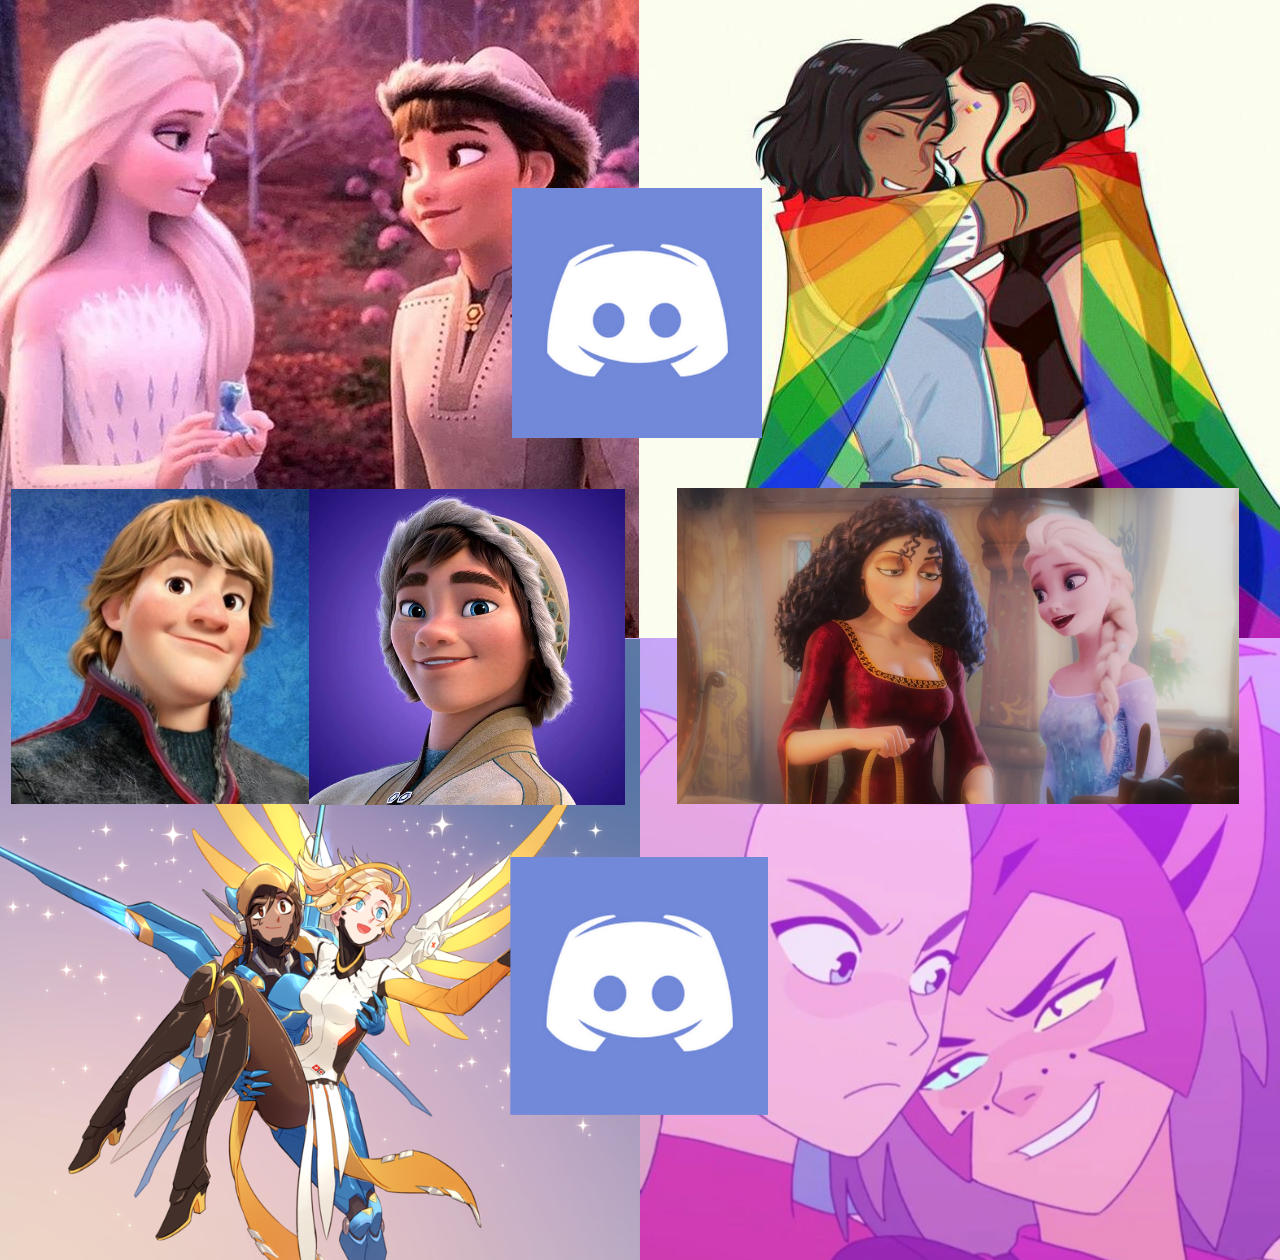 Any queer + programming Discord servers? : r/lgbt